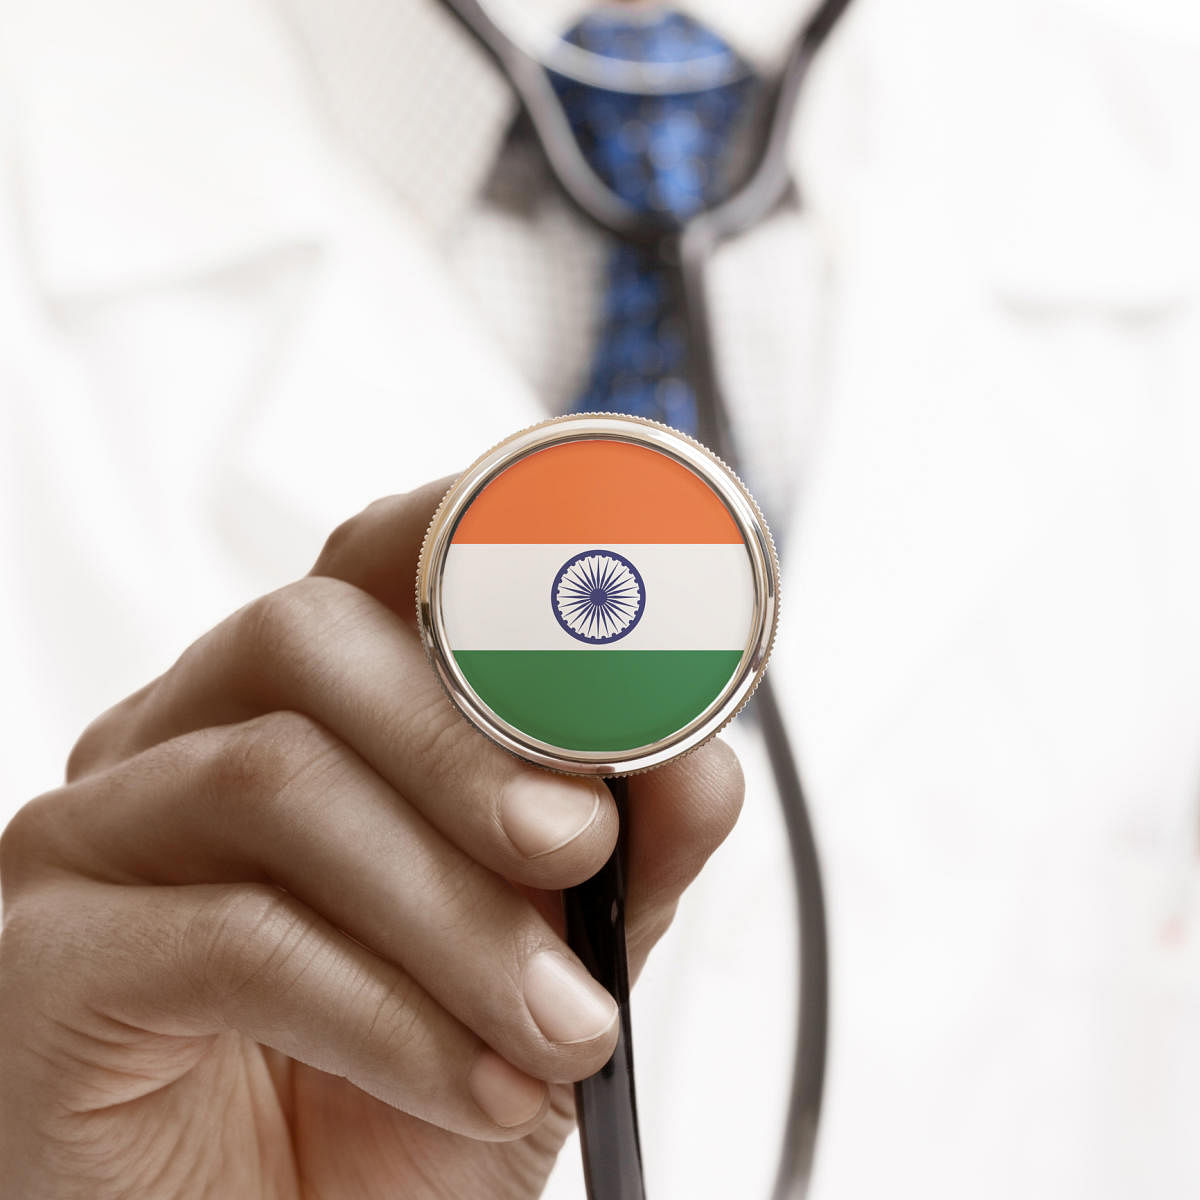 How to ensure universal healthcare in India